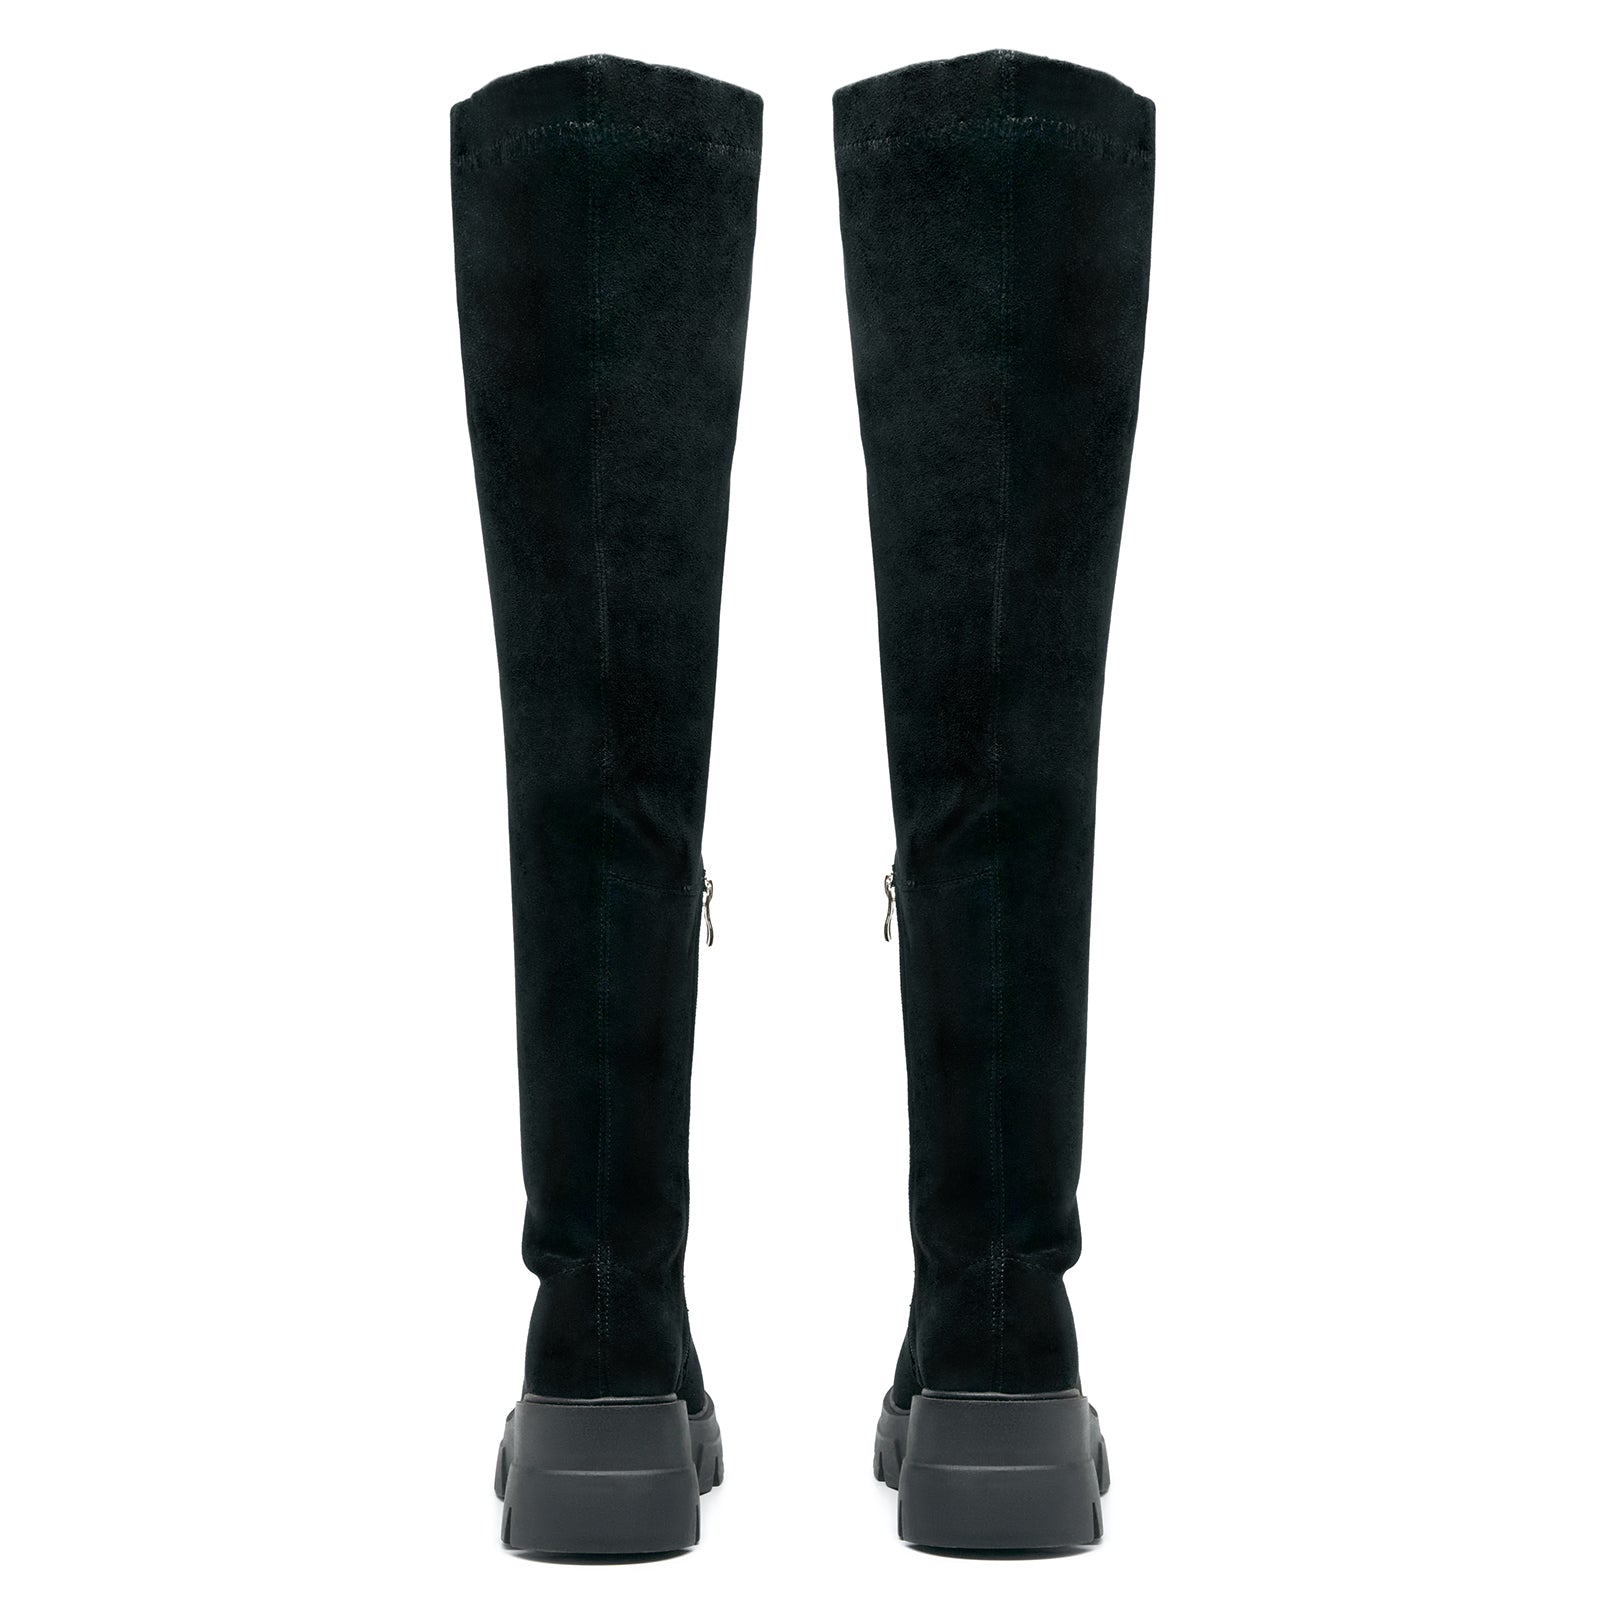 Women's Thigh High Boots Black Platform Slouch Over The Knee Black Boots